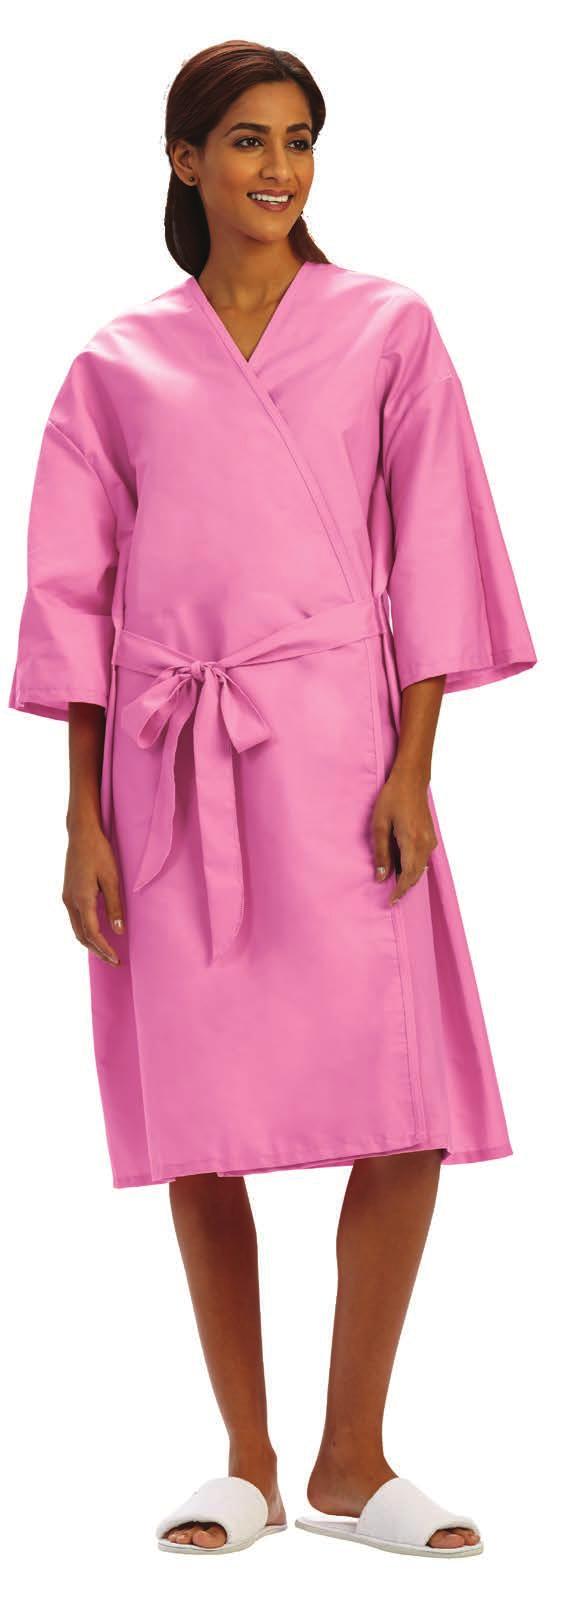 Exam Robe 650 See page